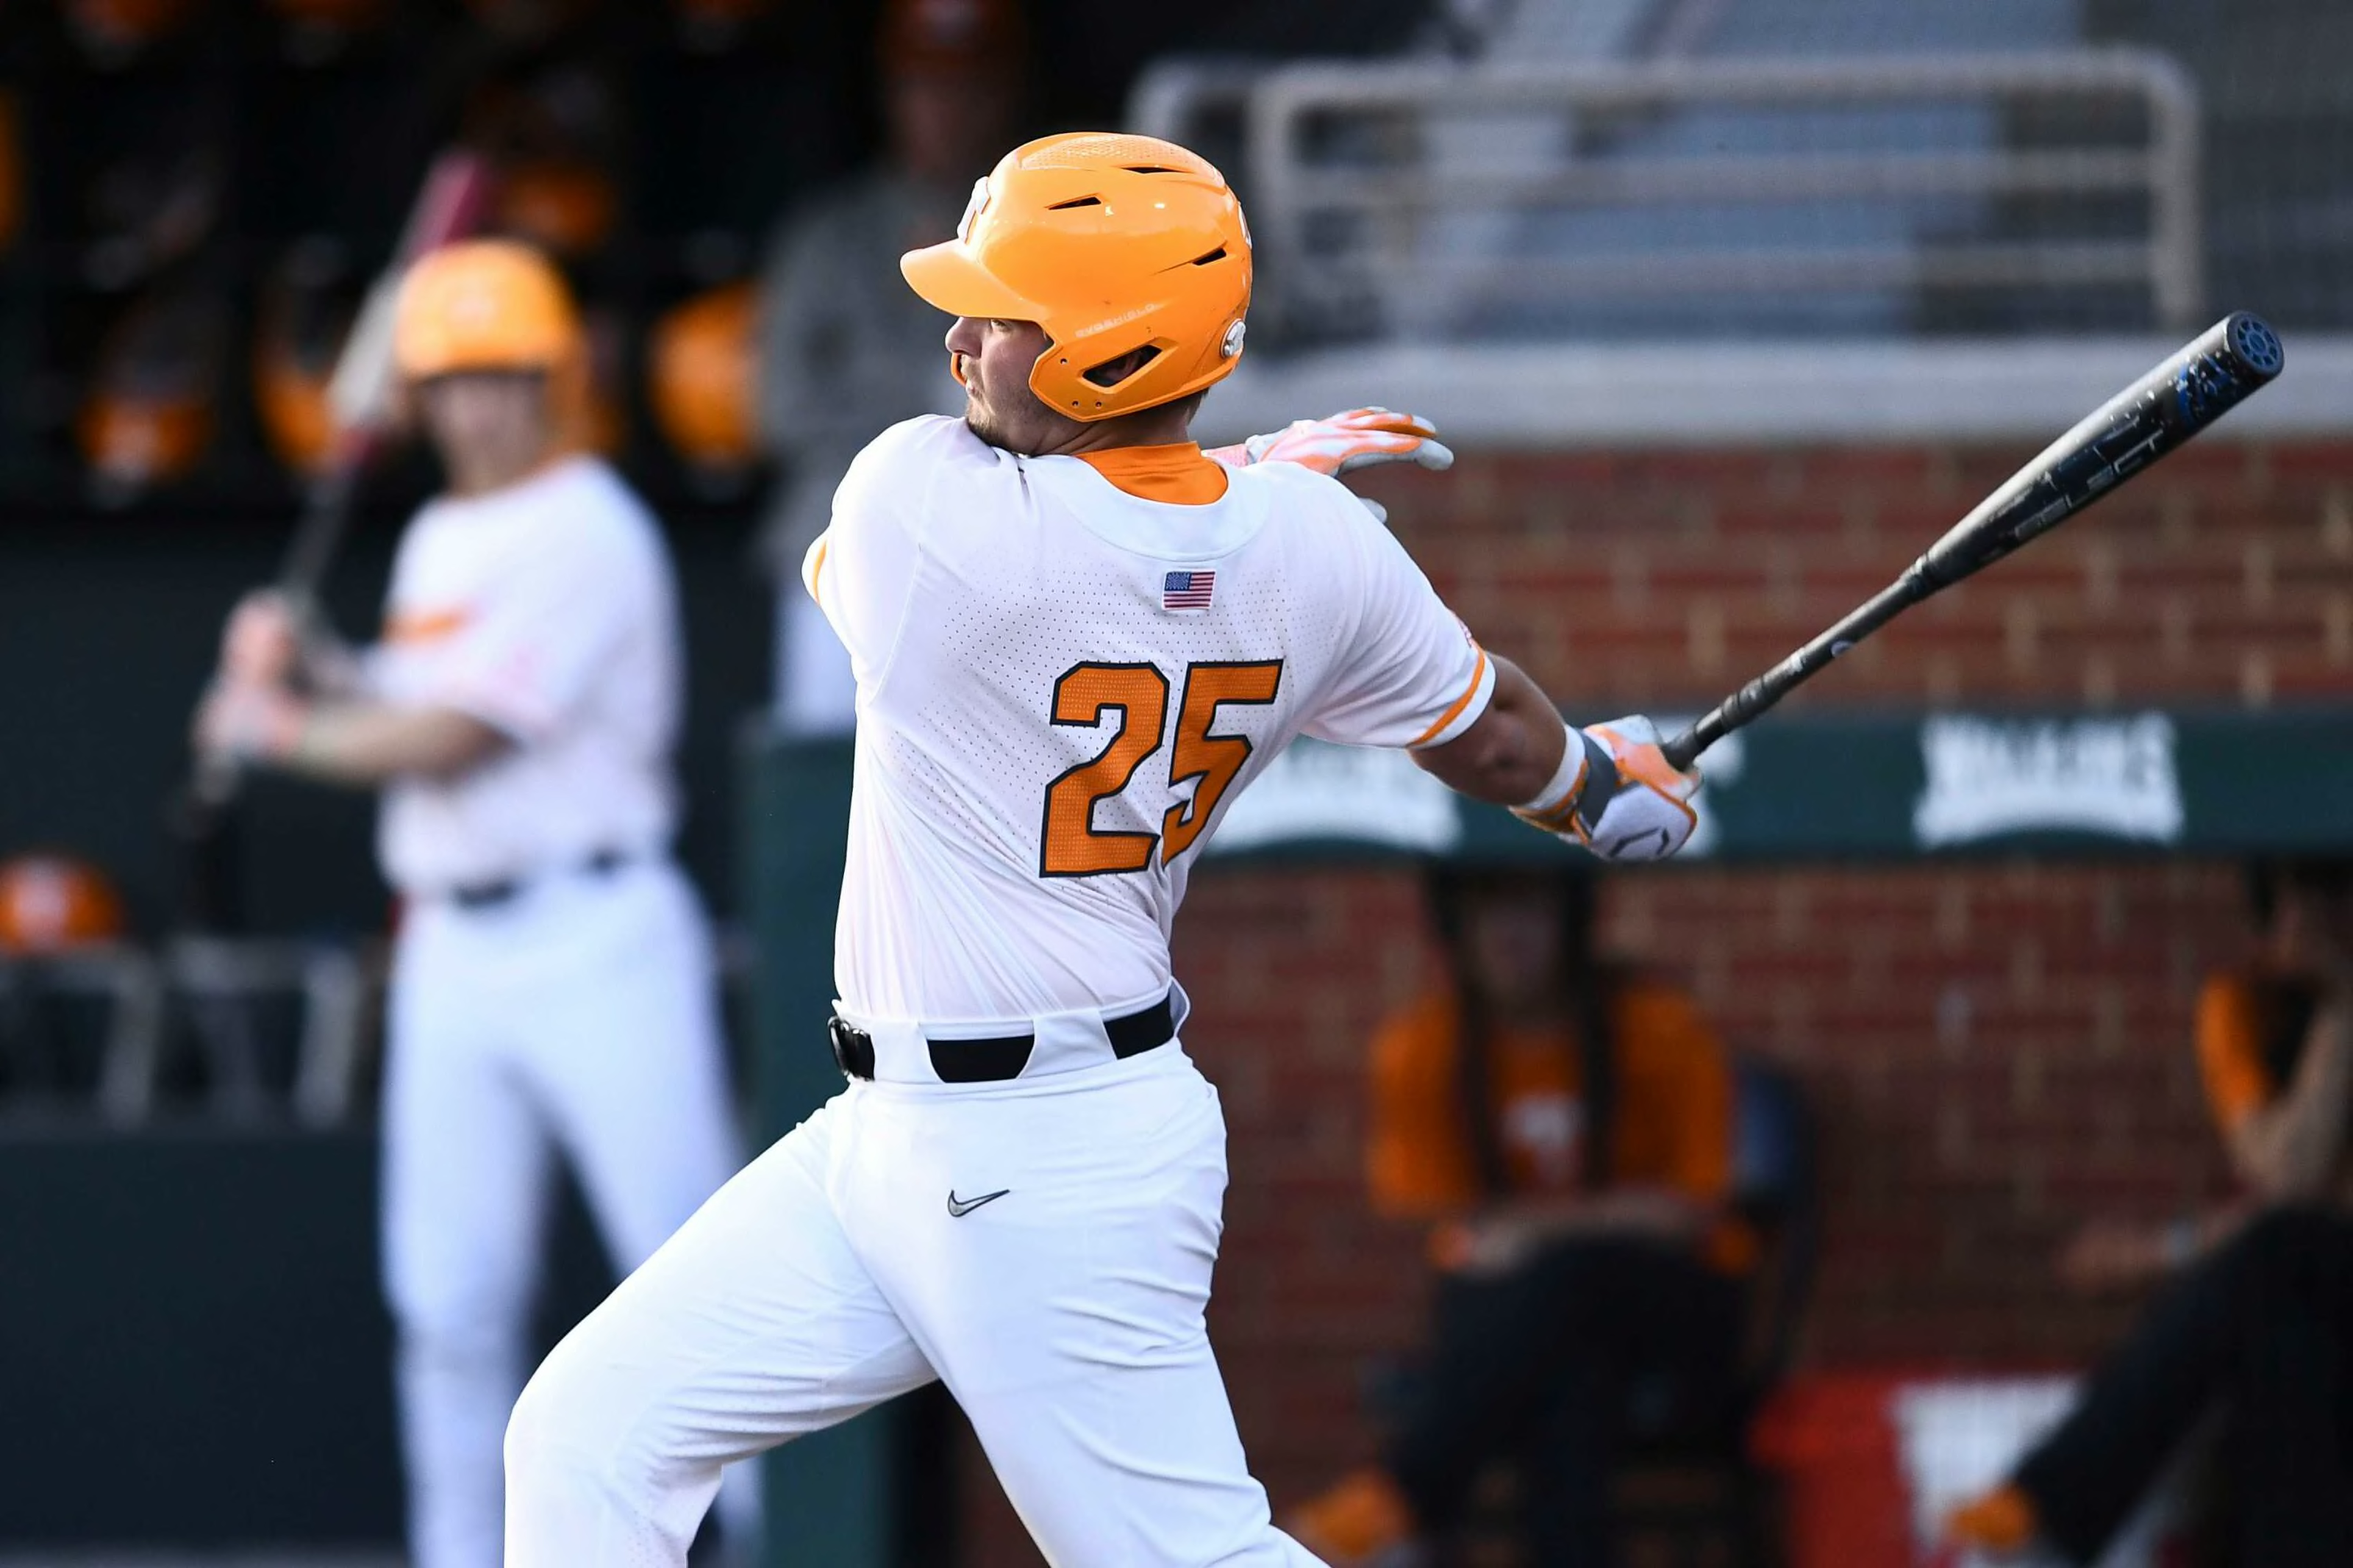 Tennessee Baseball: Photo gallery from Vols' 10-0 win in home opener